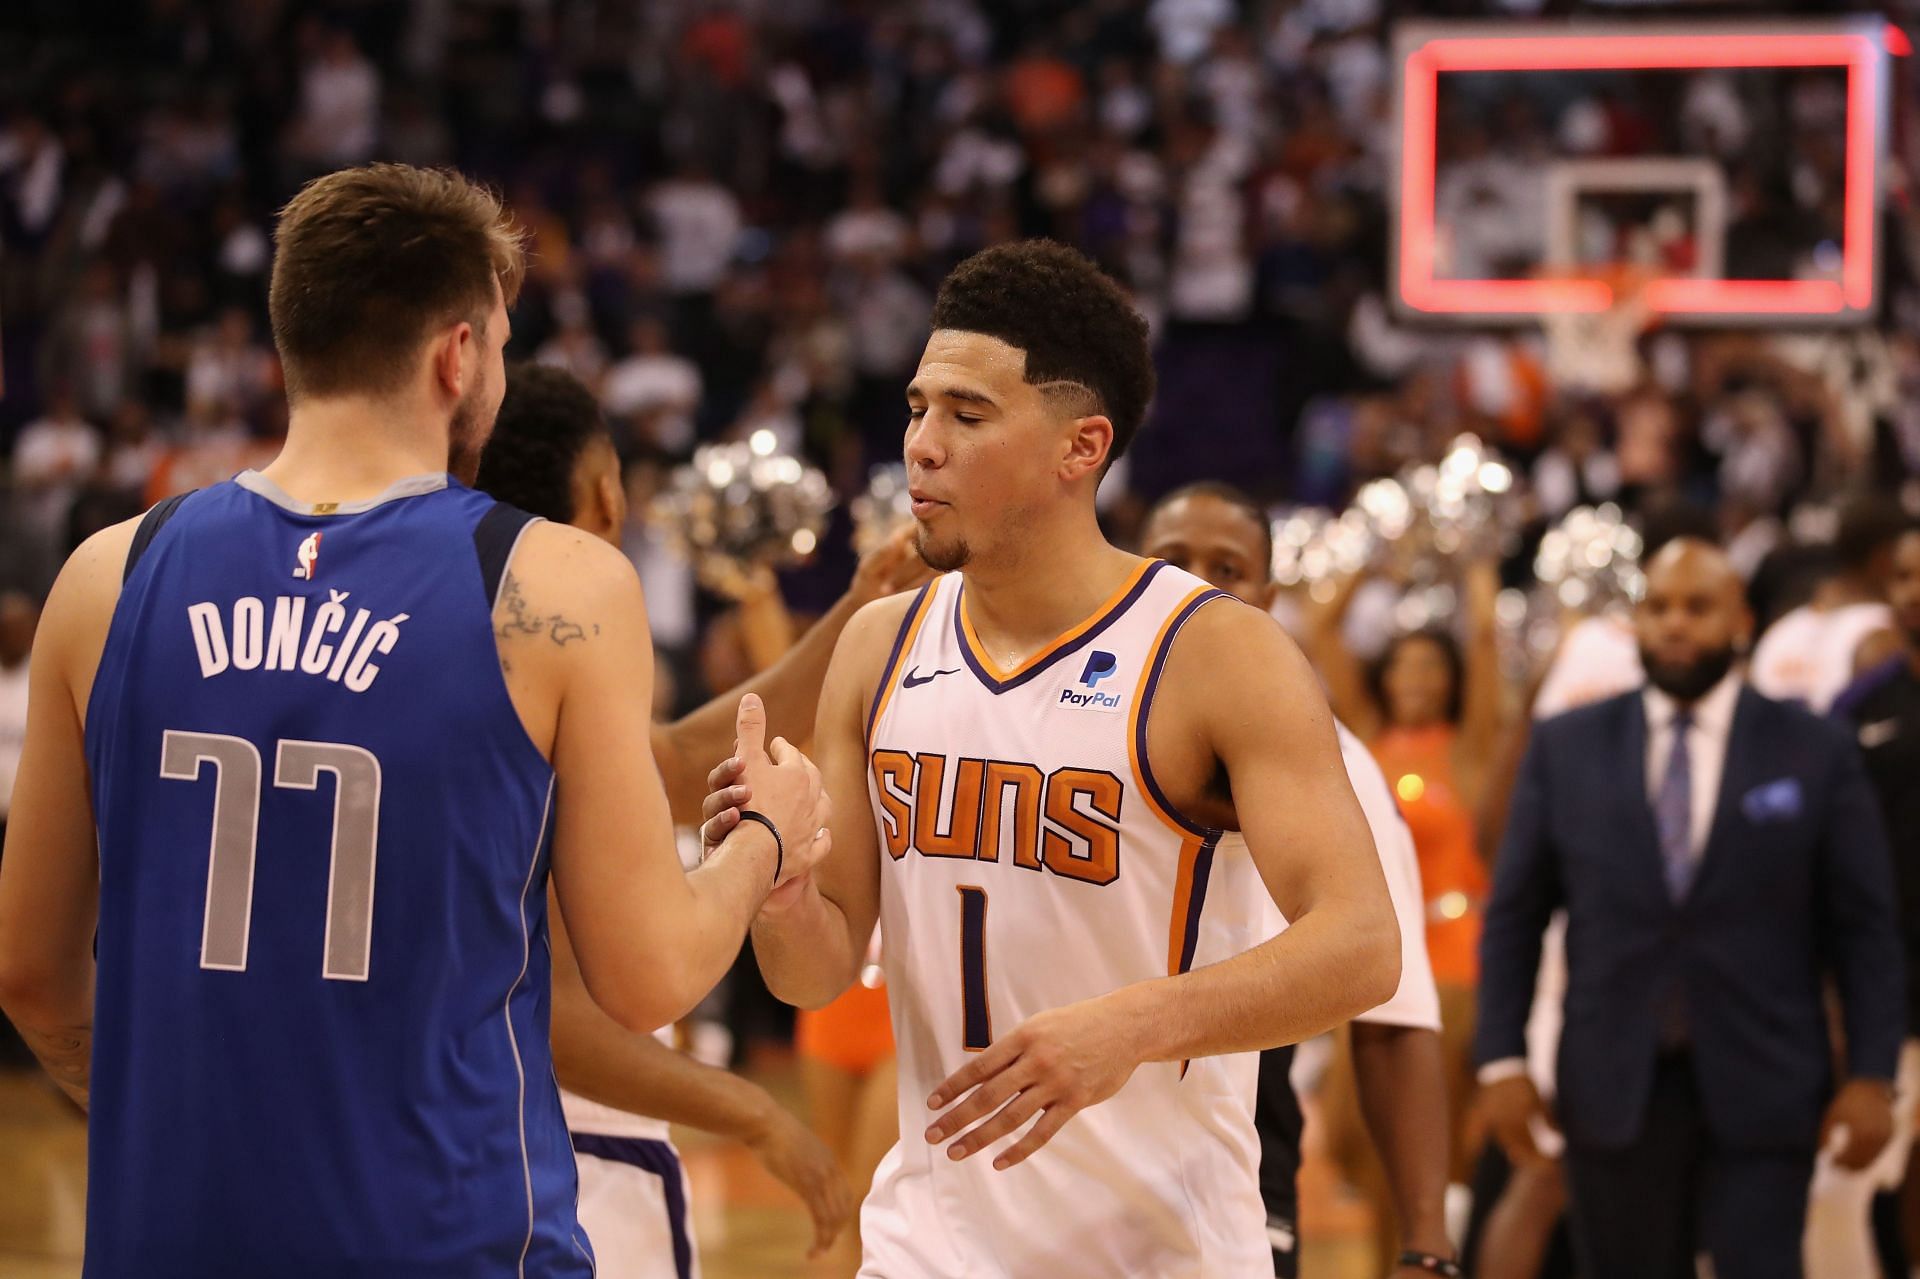 Devin Booker and Luka Doncic both went off for 28 points in Game 5, but the Phoenix Suns walked away victorious